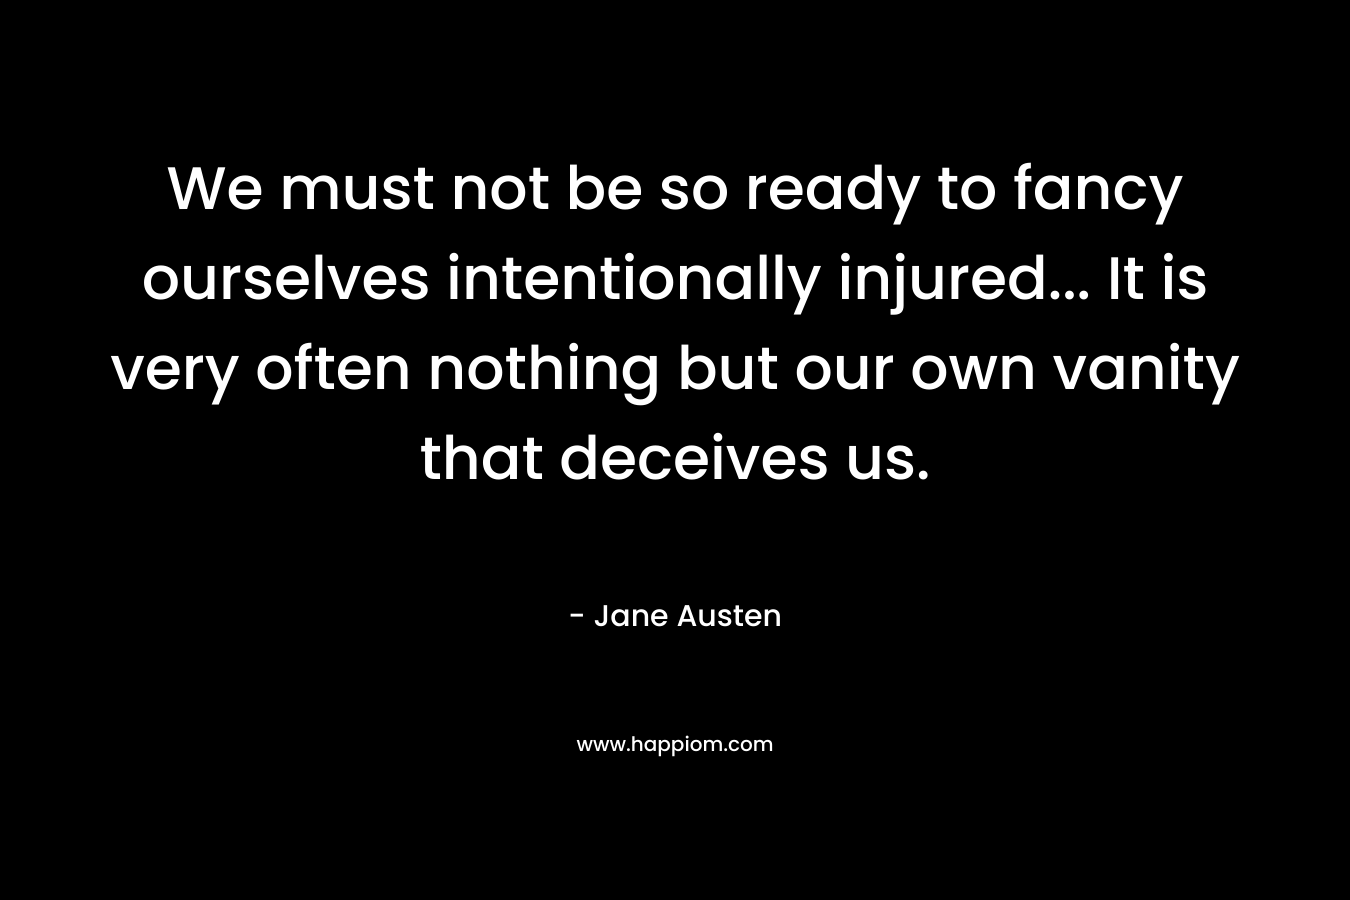 We must not be so ready to fancy ourselves intentionally injured... It is very often nothing but our own vanity that deceives us.